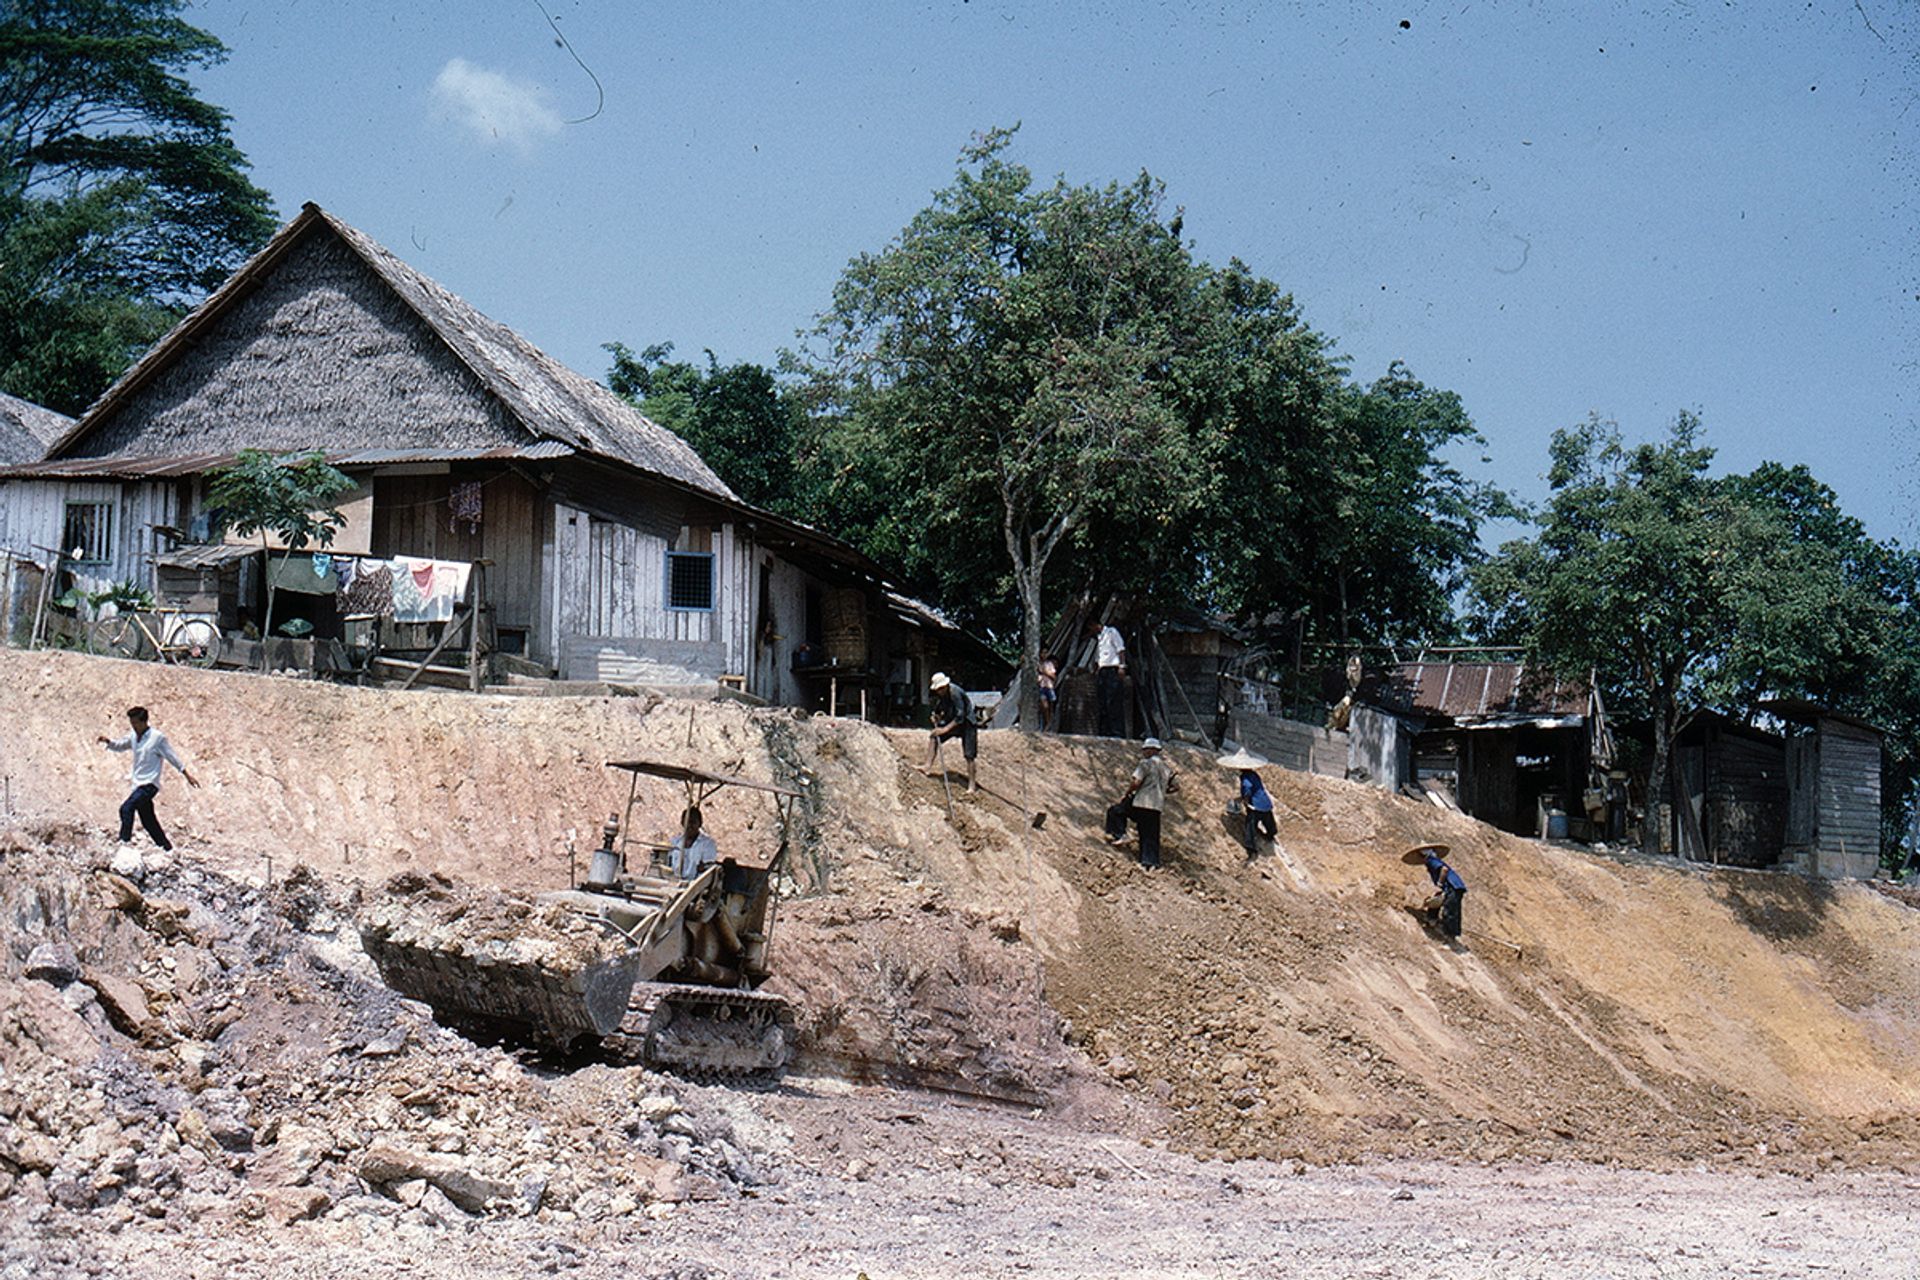 A hill in Queenstown being terraced for HDB flats around 1960. It was first roughly levelled by bulldozers, then men and women armed with cangkul (Malay for hoe) finished off the work.